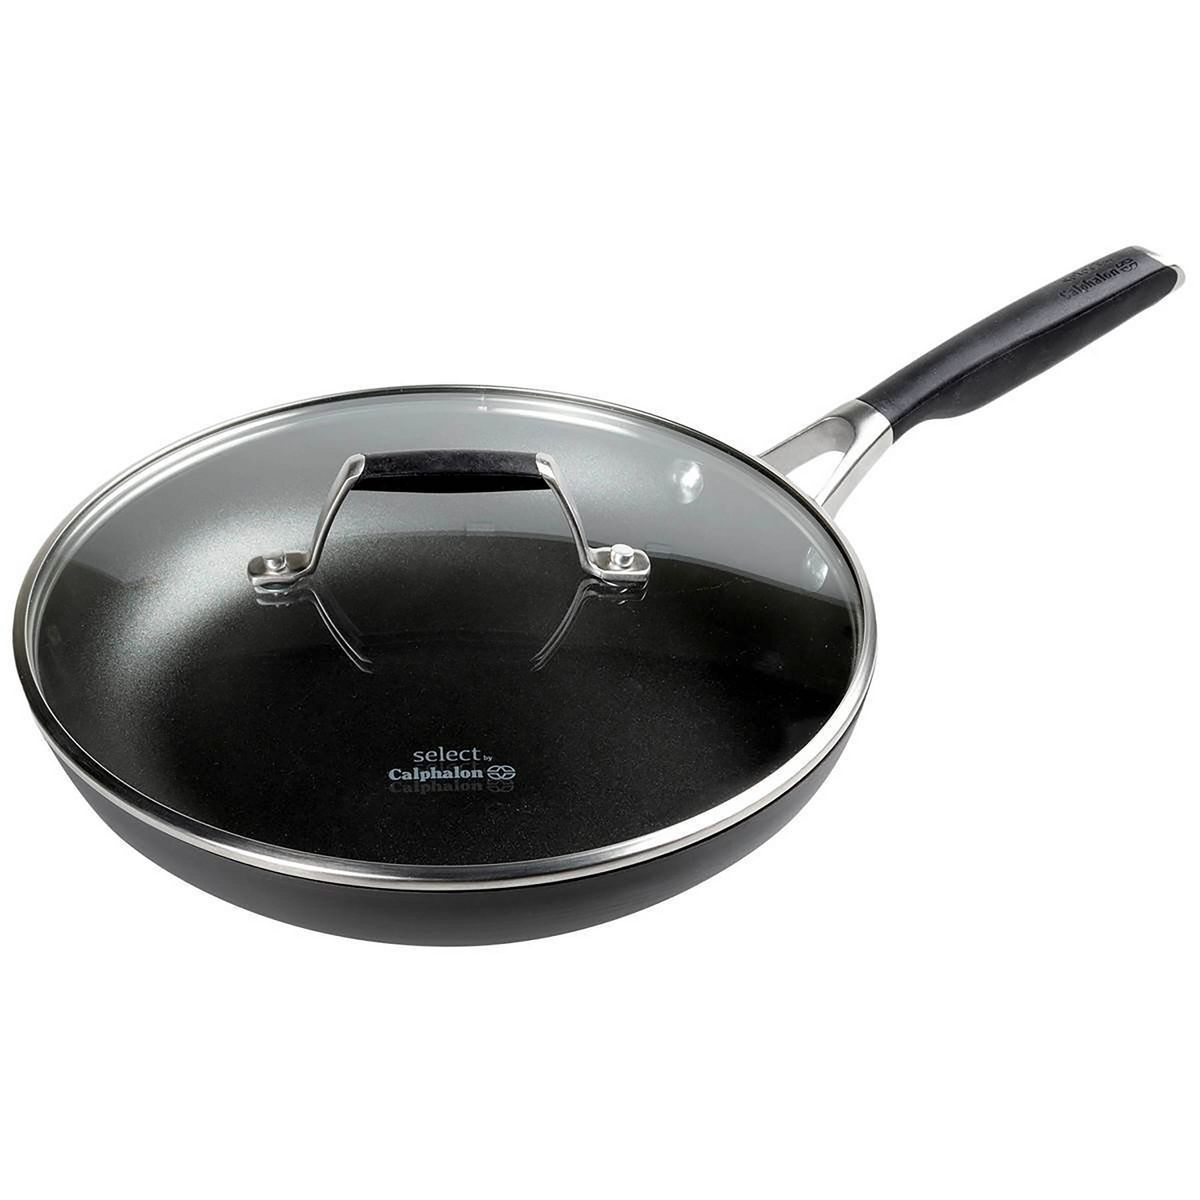 Select by Calphalon with AquaShield Nonstick 10" Fry Pan with Lid | Target